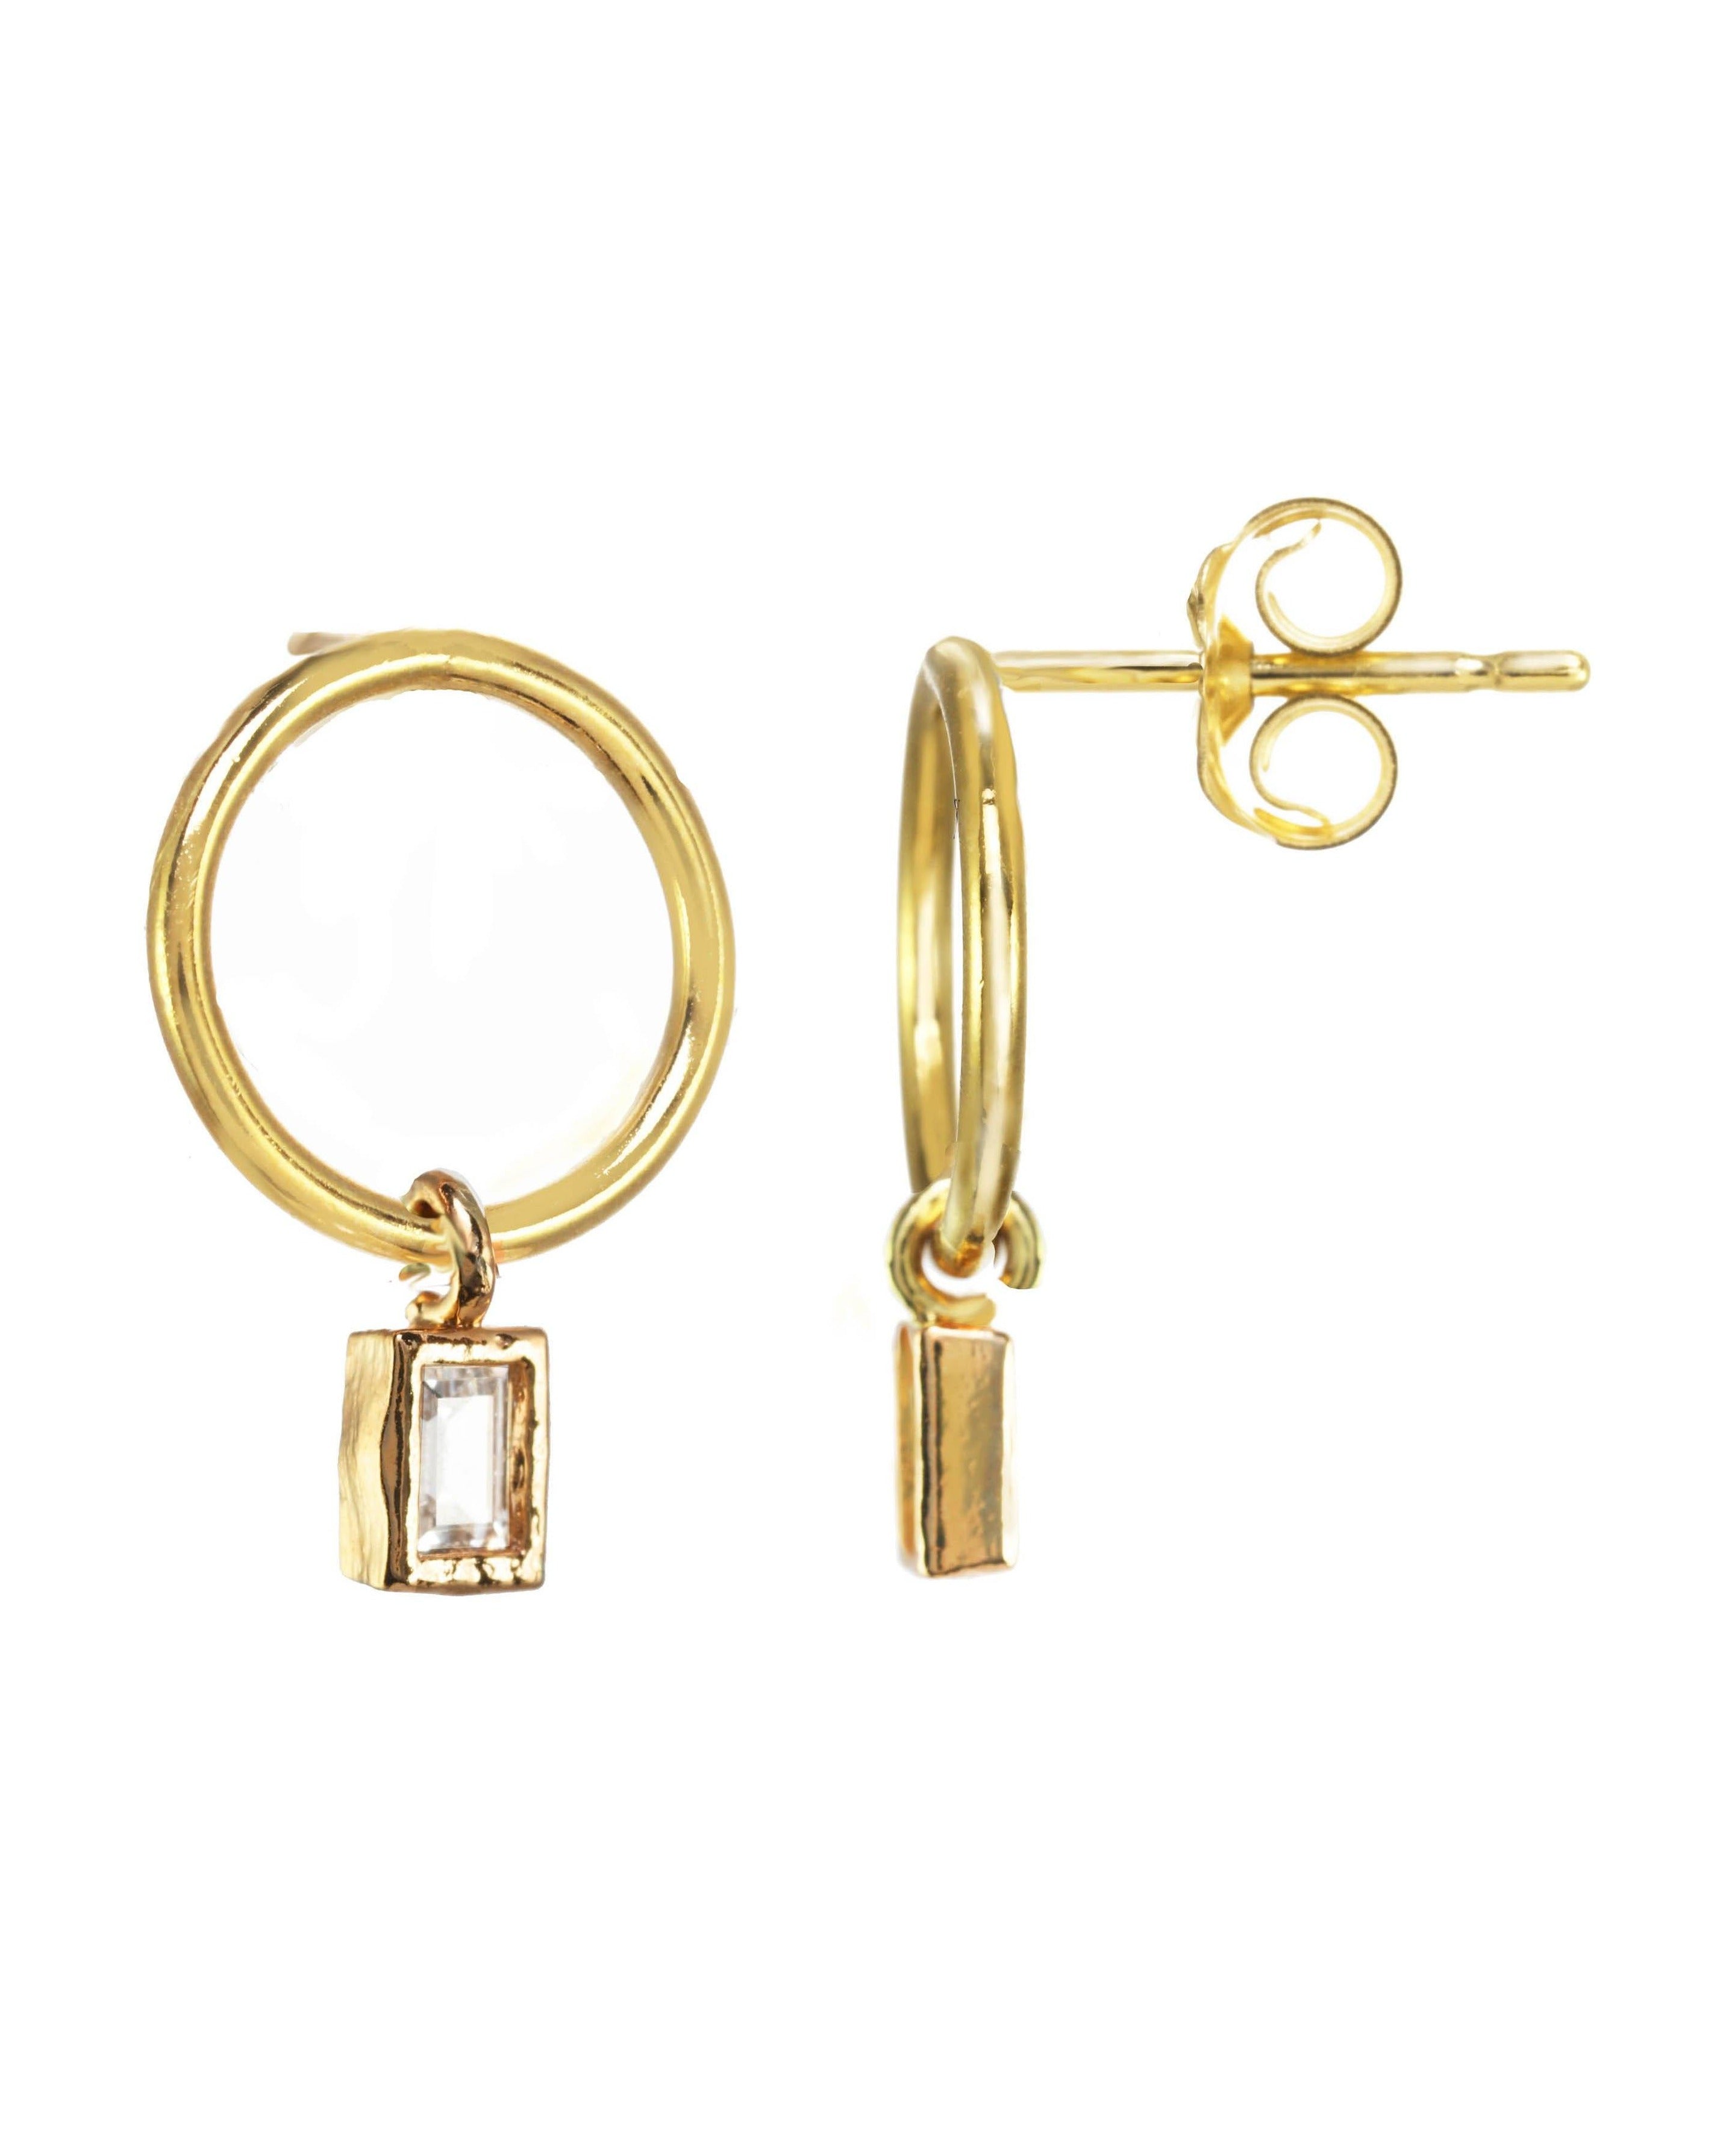 Hannah Earrings by KOZAKH. Mini hoop stud earrings with dangly square cut Cubic Zirconia, crafted in 14K Gold Filled.